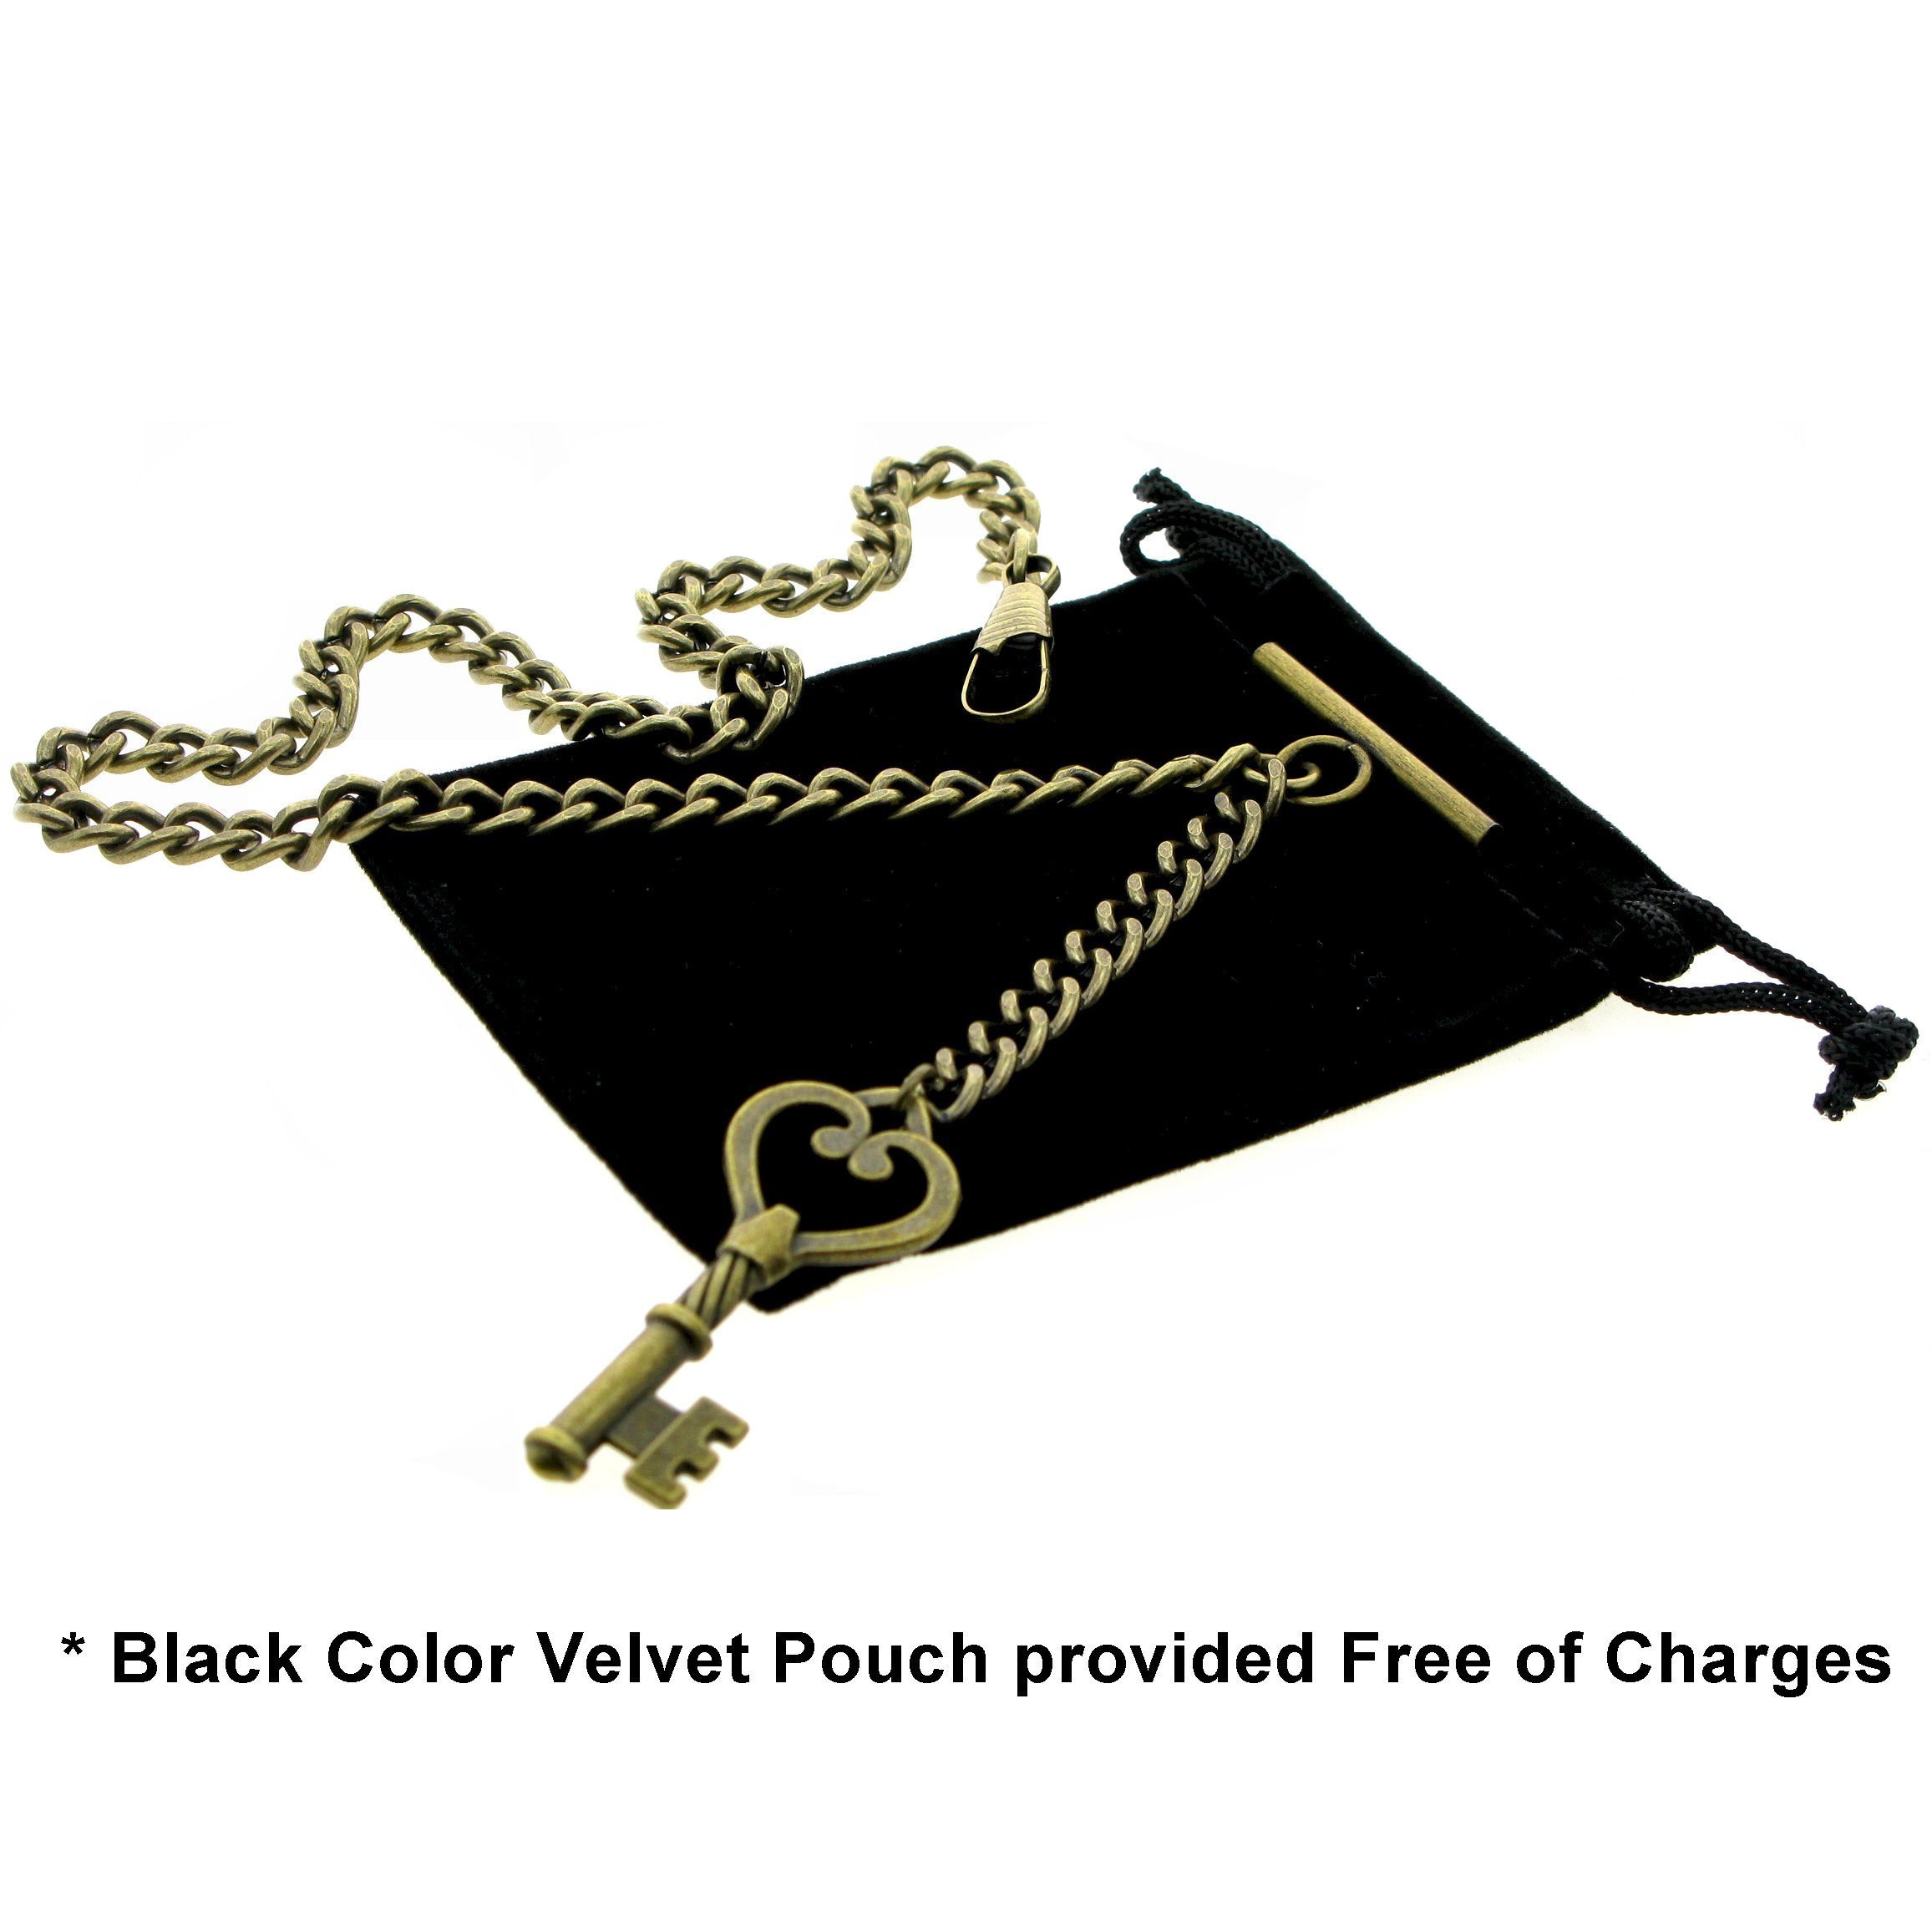 Albert Chain Pocket Watch Chains for Men Antique Brass Plating with Antique Key Design Fob T Bar AC19